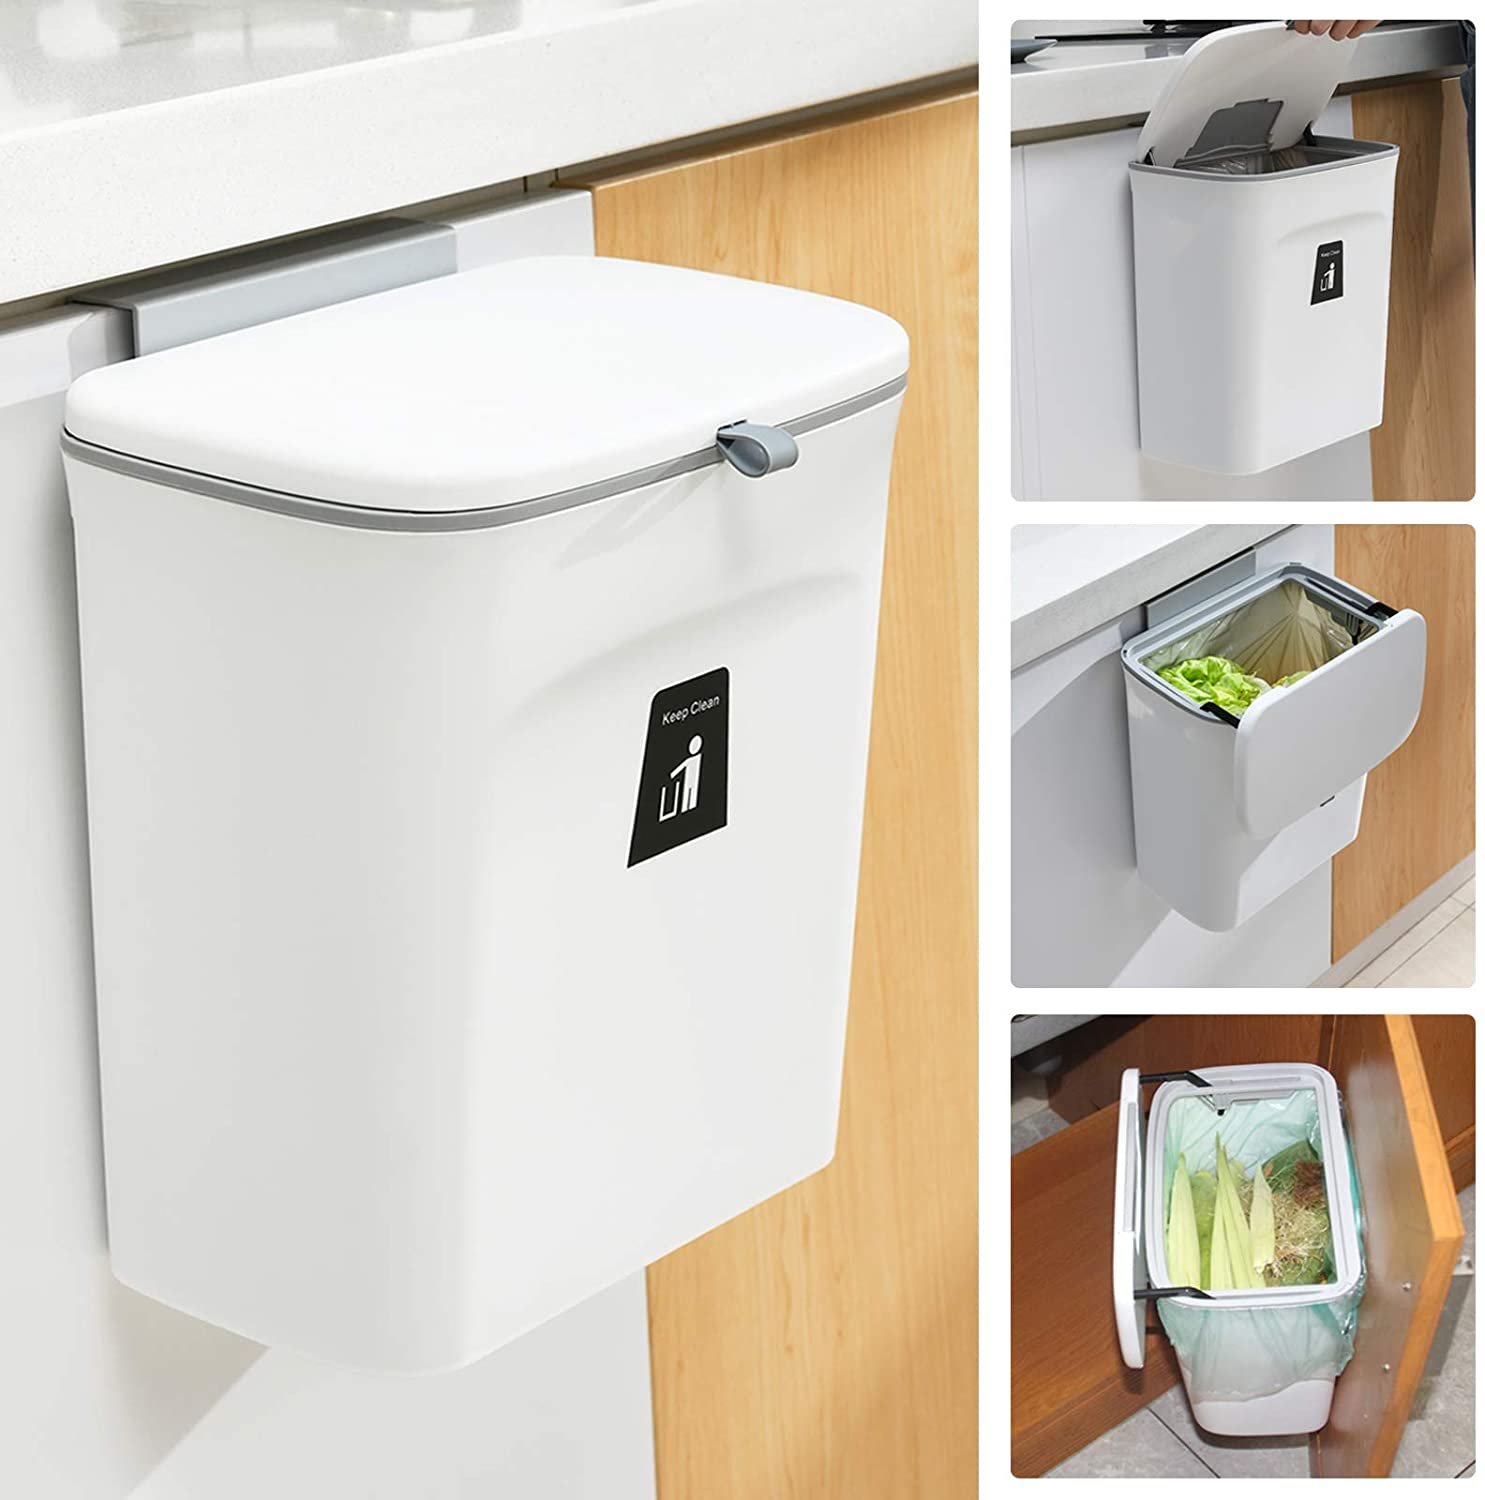 Tiyafuro Kitchen Compost Bin for Counter Top or Under Sink, Hanging Trash Can